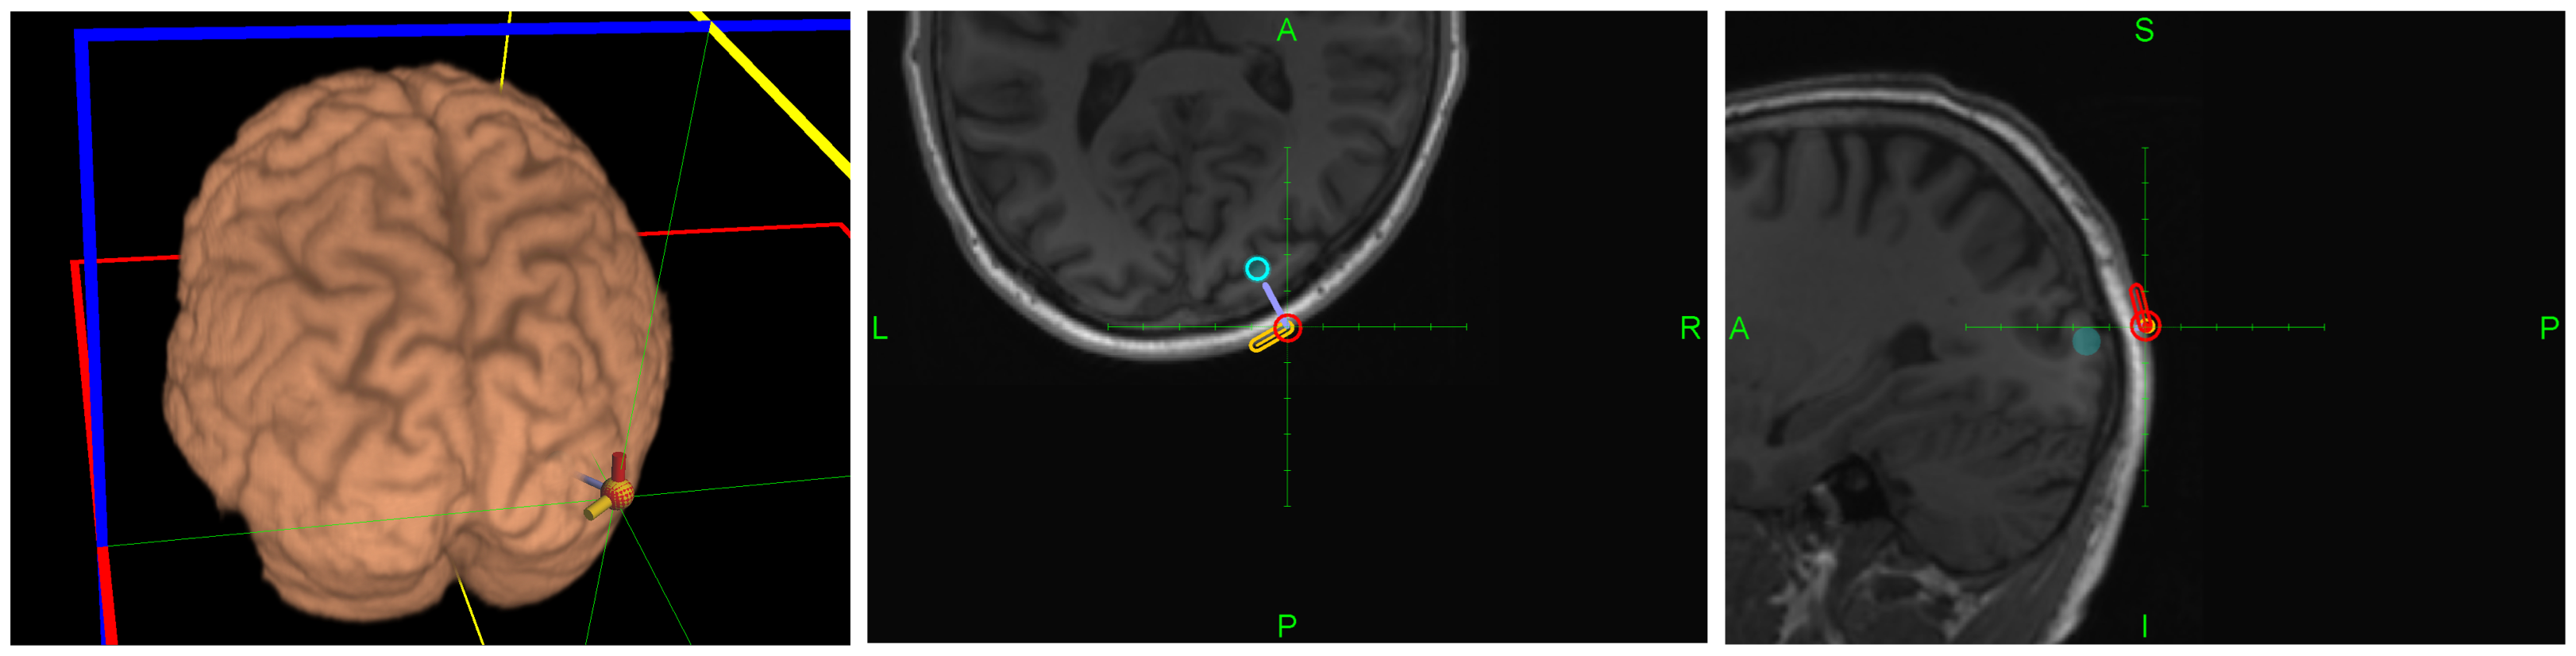 Figure 3. Location and orientation of hot spot for phospene production overlaid on MRI image of the head of subject 2 (see Figure 2). The active direction producing phospenes is highlighted in orange (in red, the orthogonal direction not producing phosphenes).